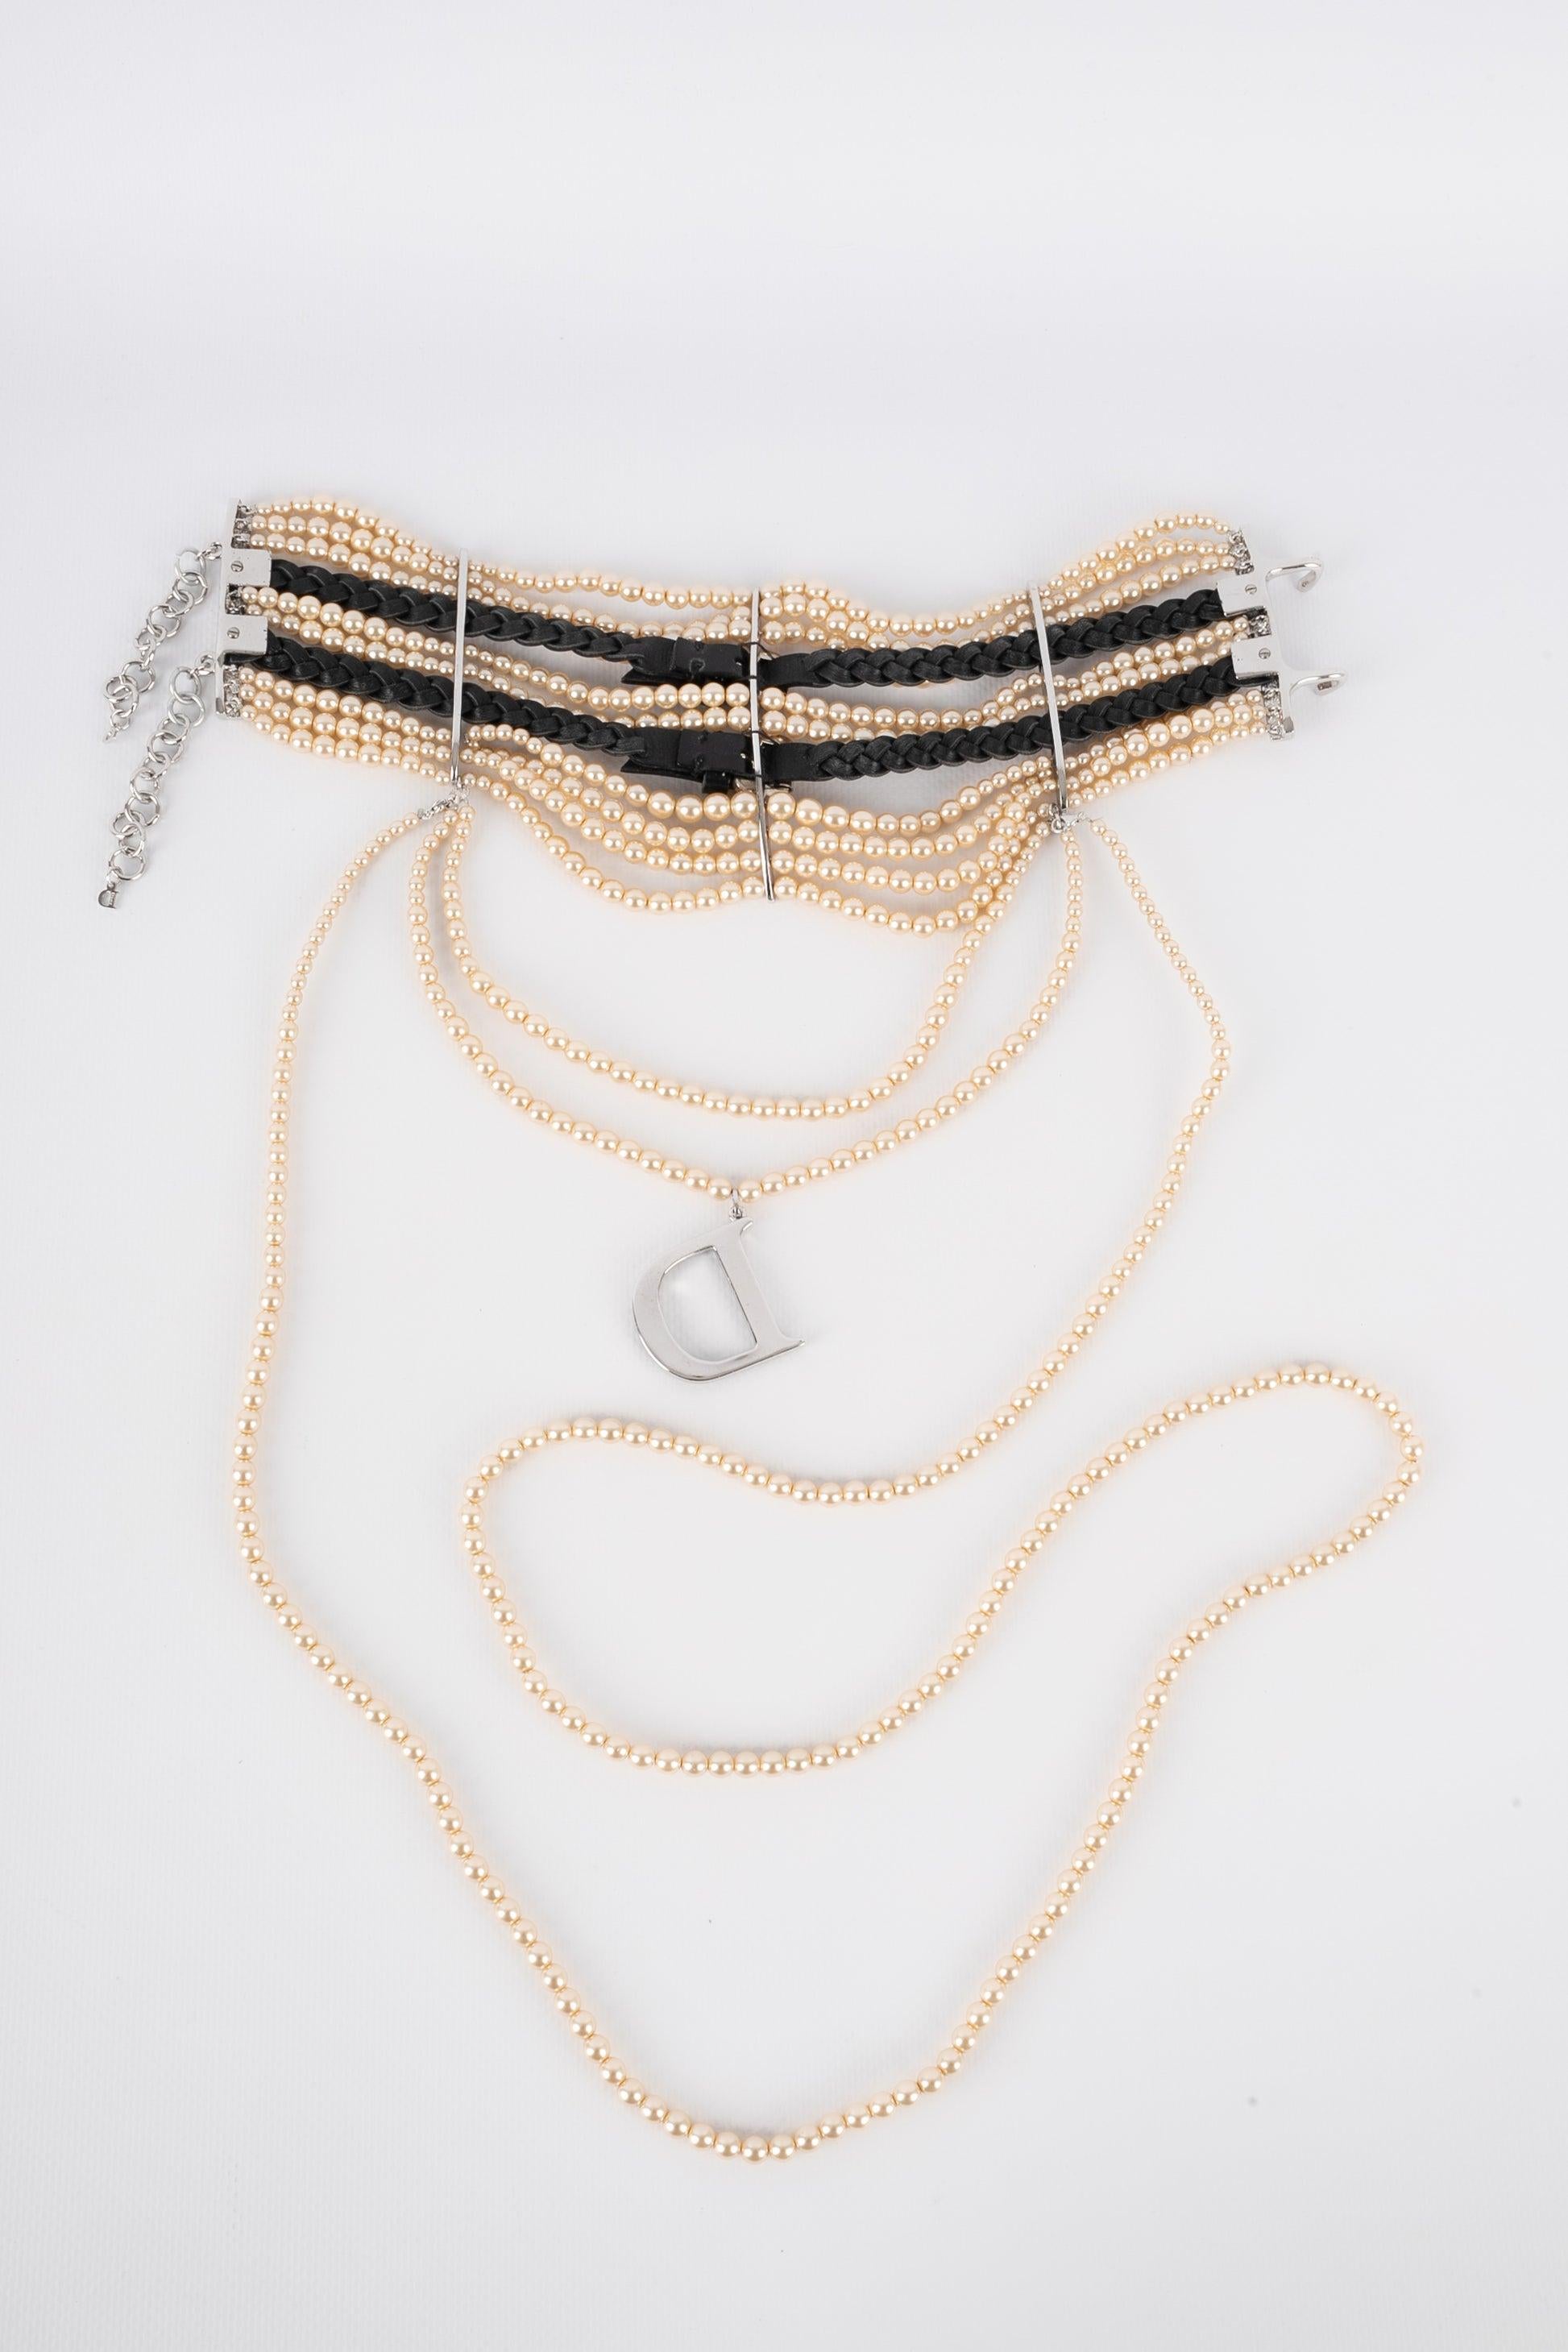 Christian Dior Massaï Necklace with Pearls and Black Leather, 2004 6